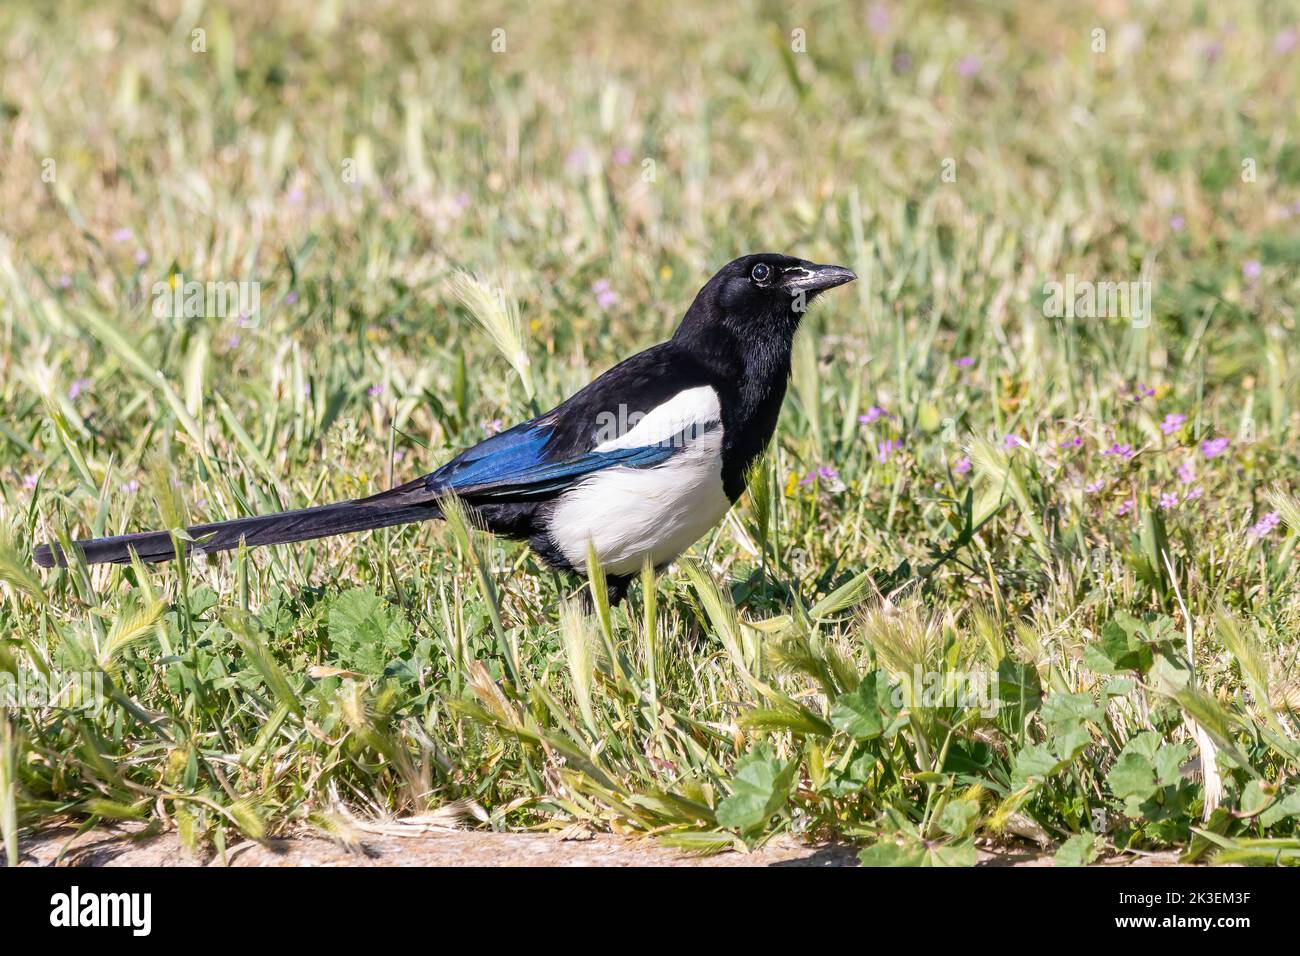 The Eurasian magpie or common magpie (Pica pica), resident breeding bird throughout the northern part of the Eurasian continent. It is one of birds in Stock Photo